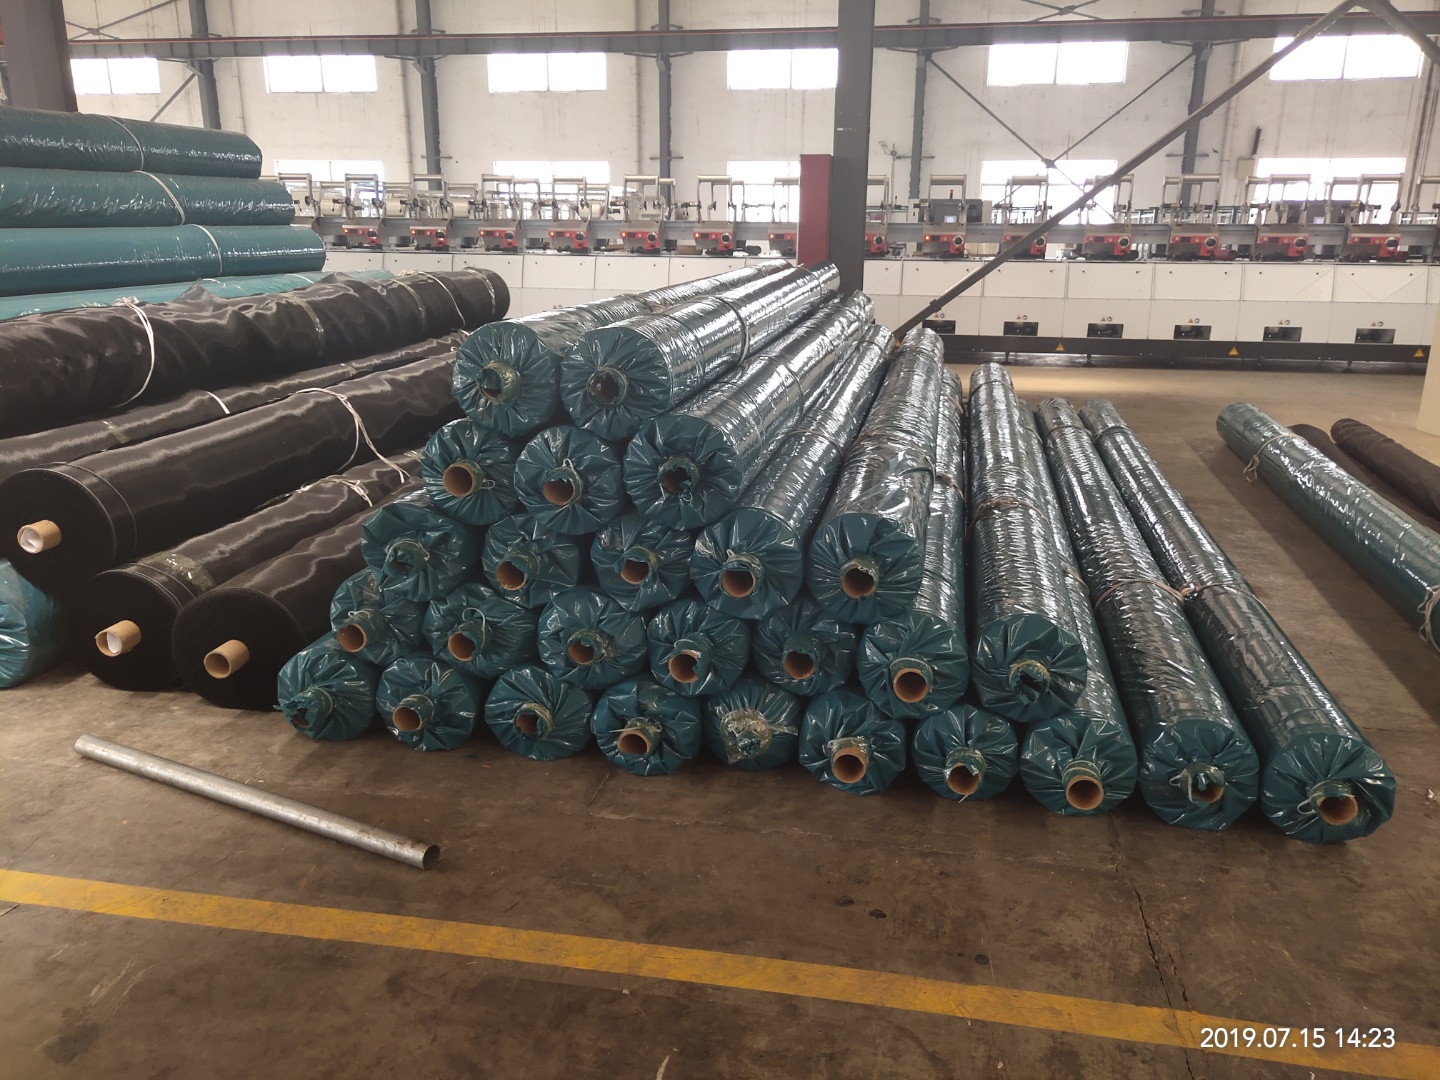 Drainage & Stabilization Woven Geotextile Fabric